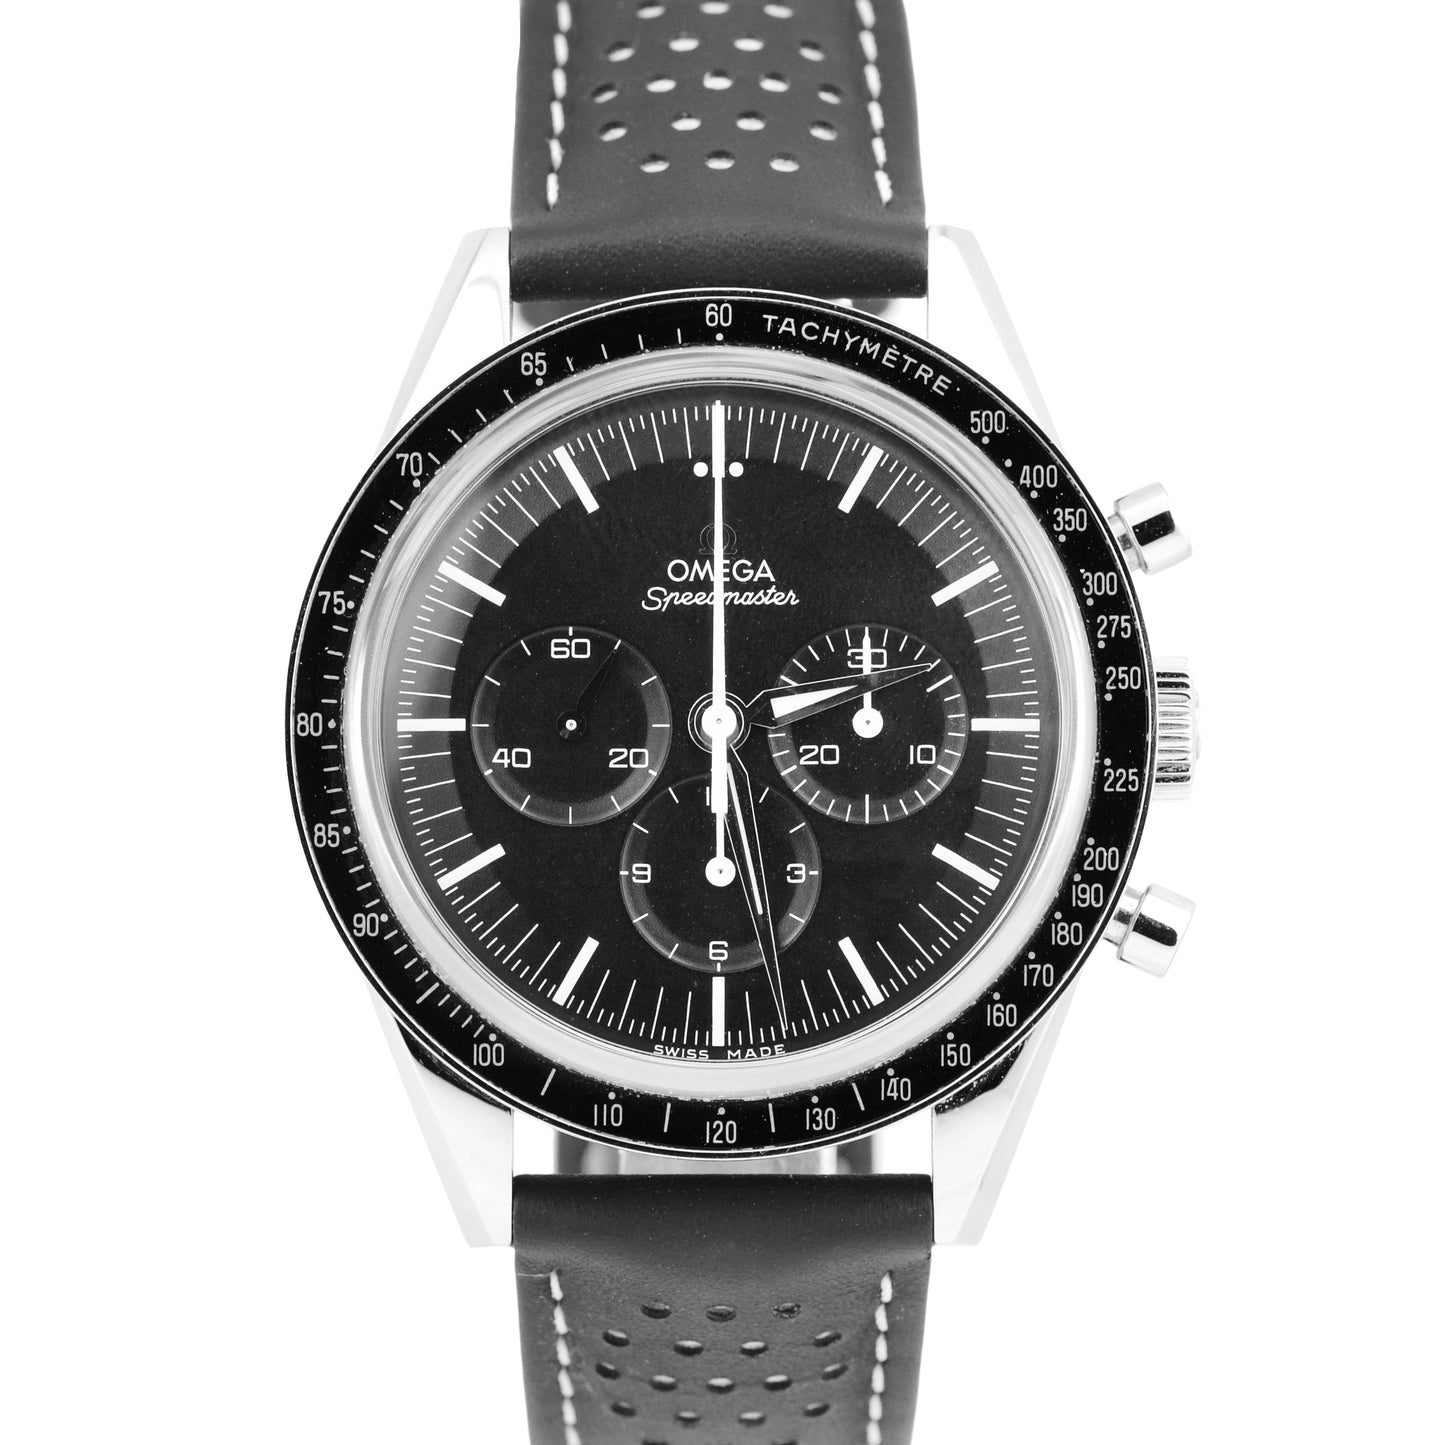 2021 PAPERS OMEGA Speedmaster 1st Omega in Space 311.32.40.30.01.001 39.7mm B+P